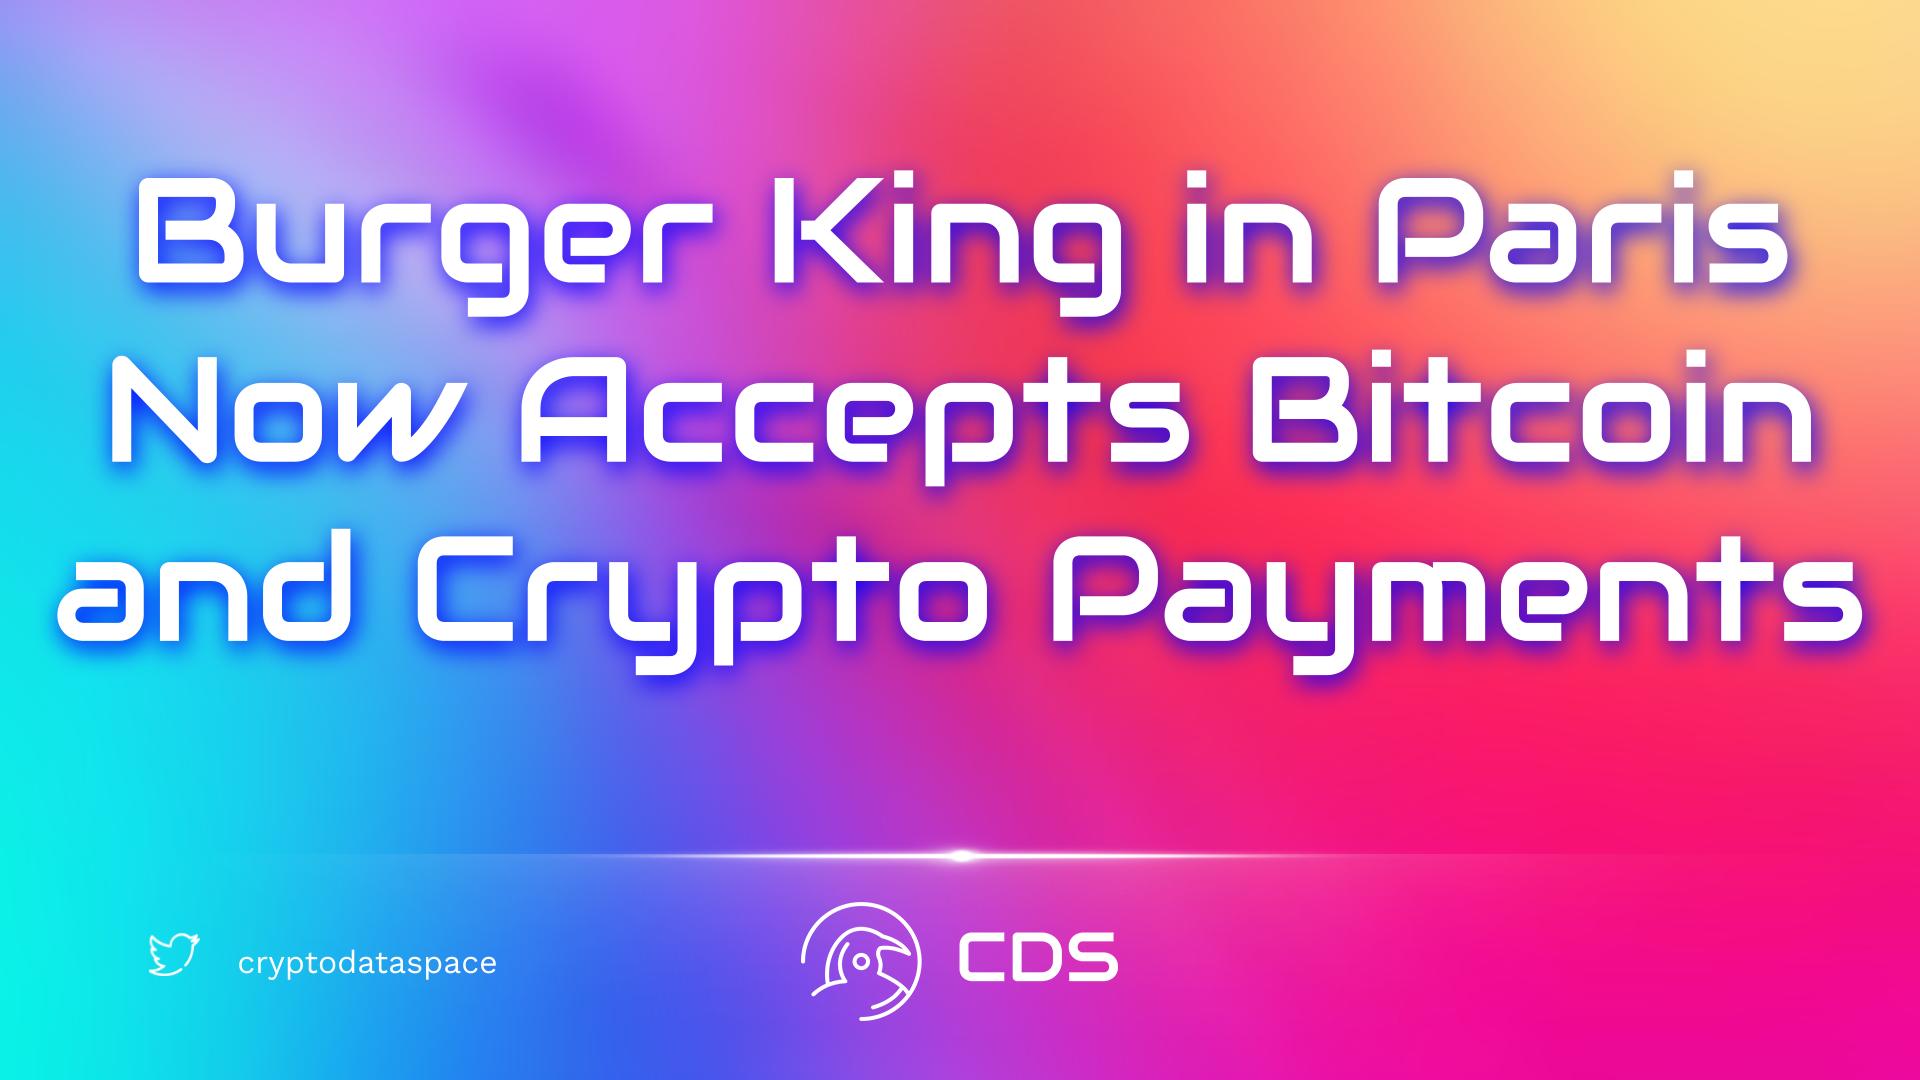 Burger King in Paris Now Accepts Bitcoin and Crypto Payments